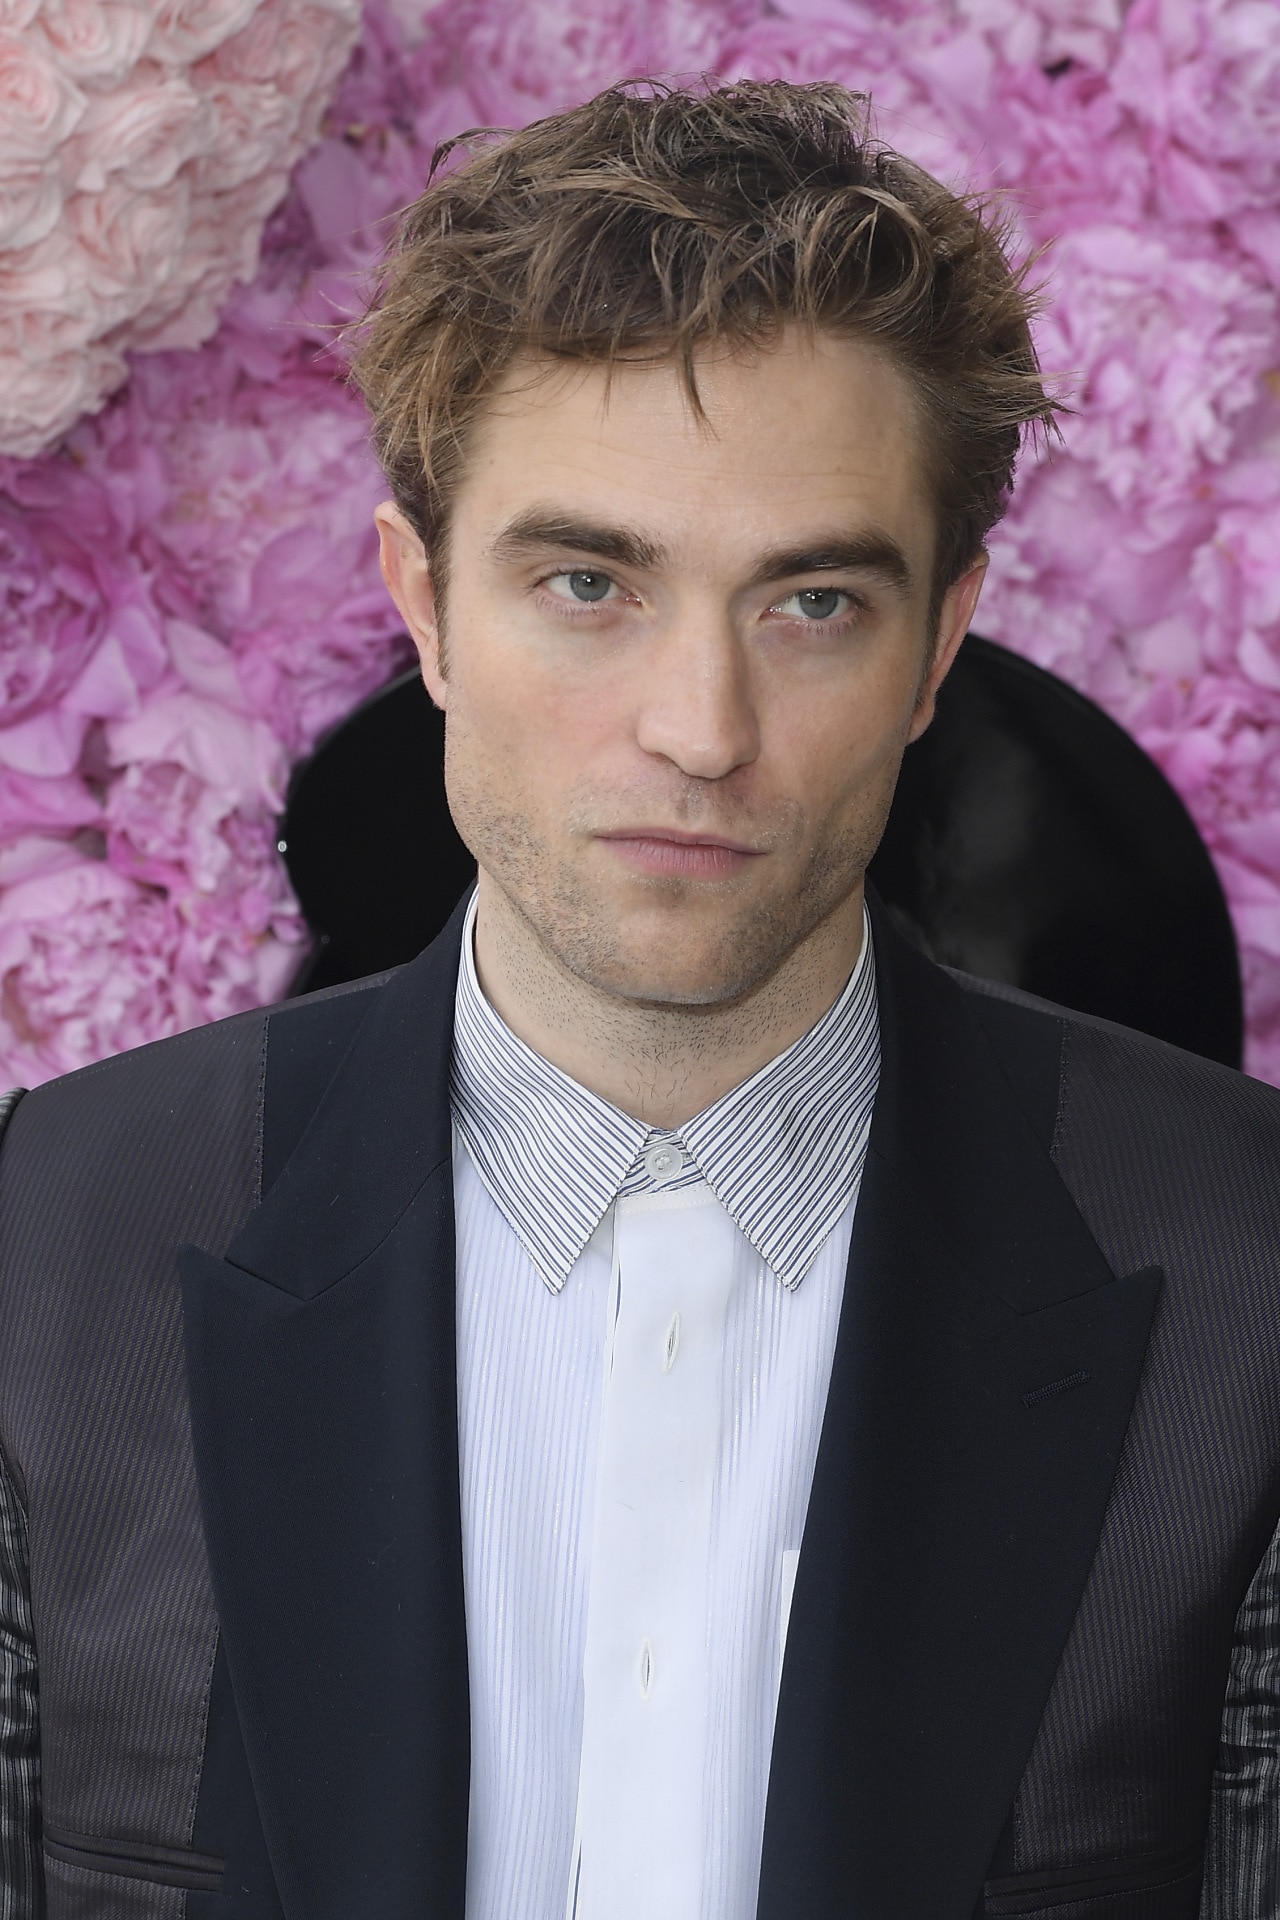 who is dating rob pattinson